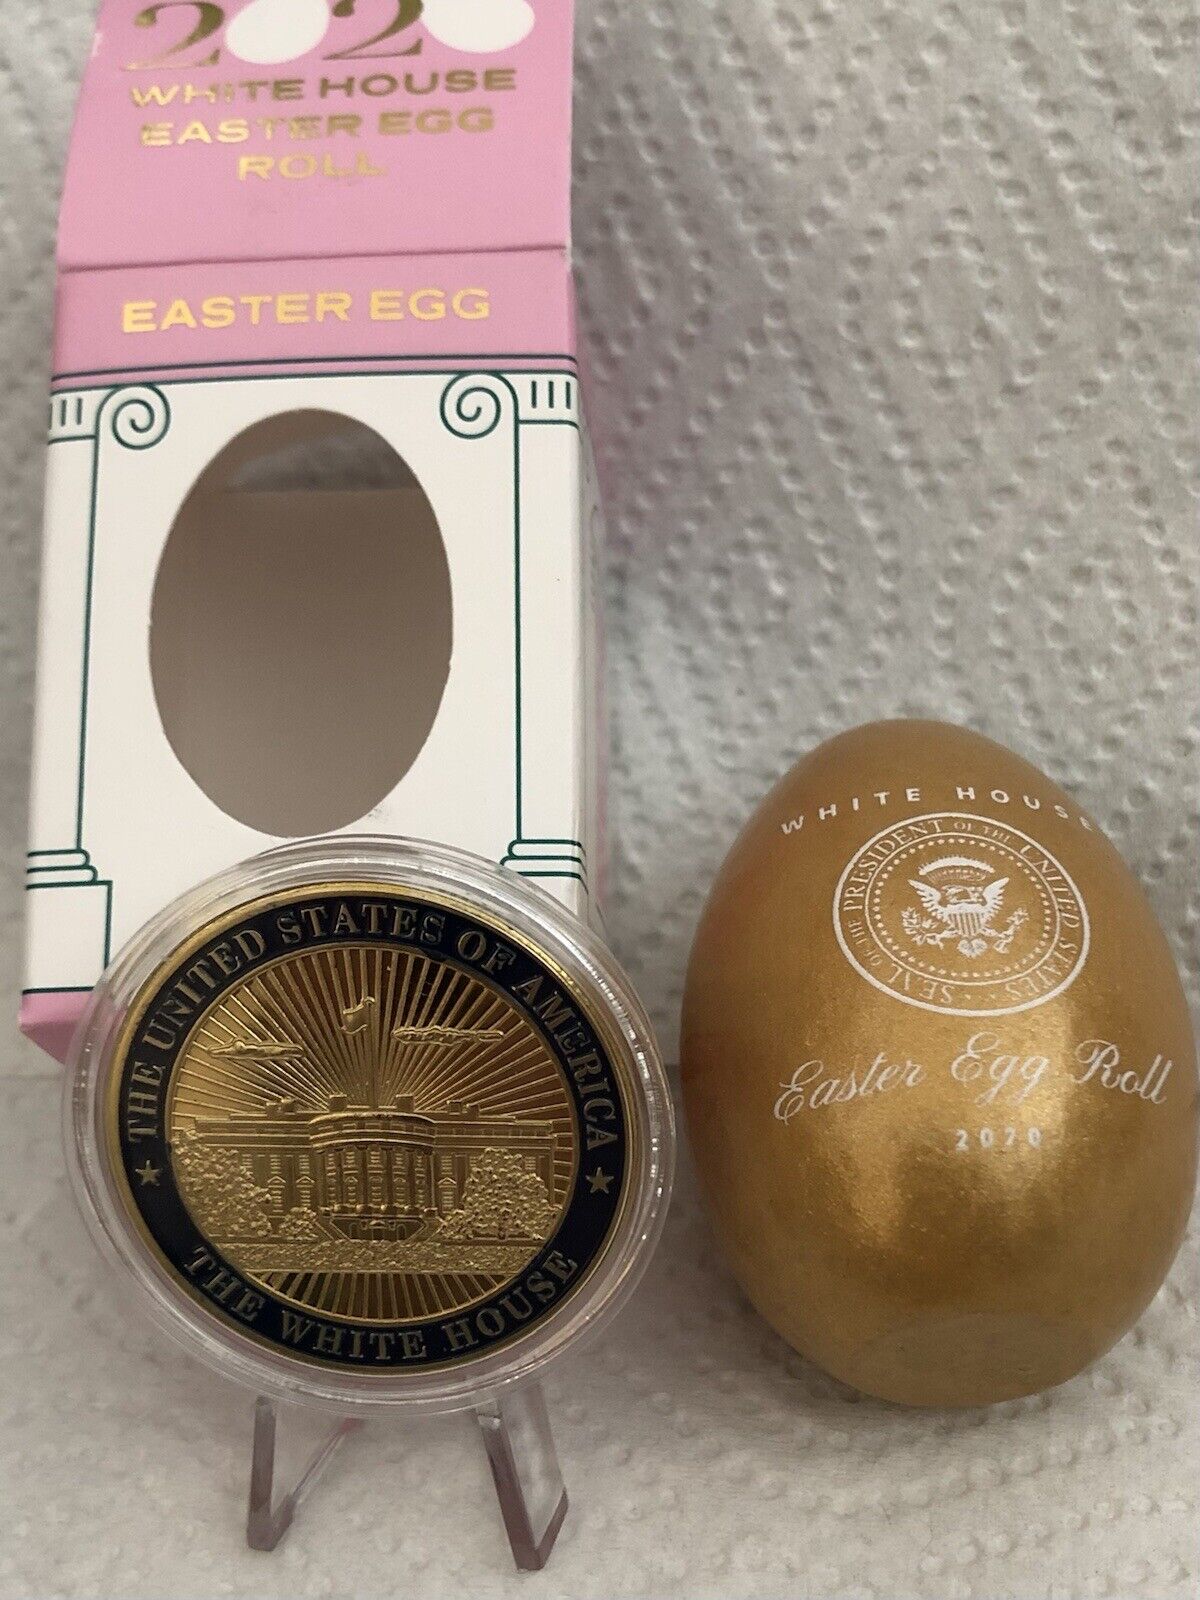 TRUMP 2020 GOLD EASTER EGG + WHITE HOUSE CHALLENGE COIN PRESIDENT REPUBLICAN GOP